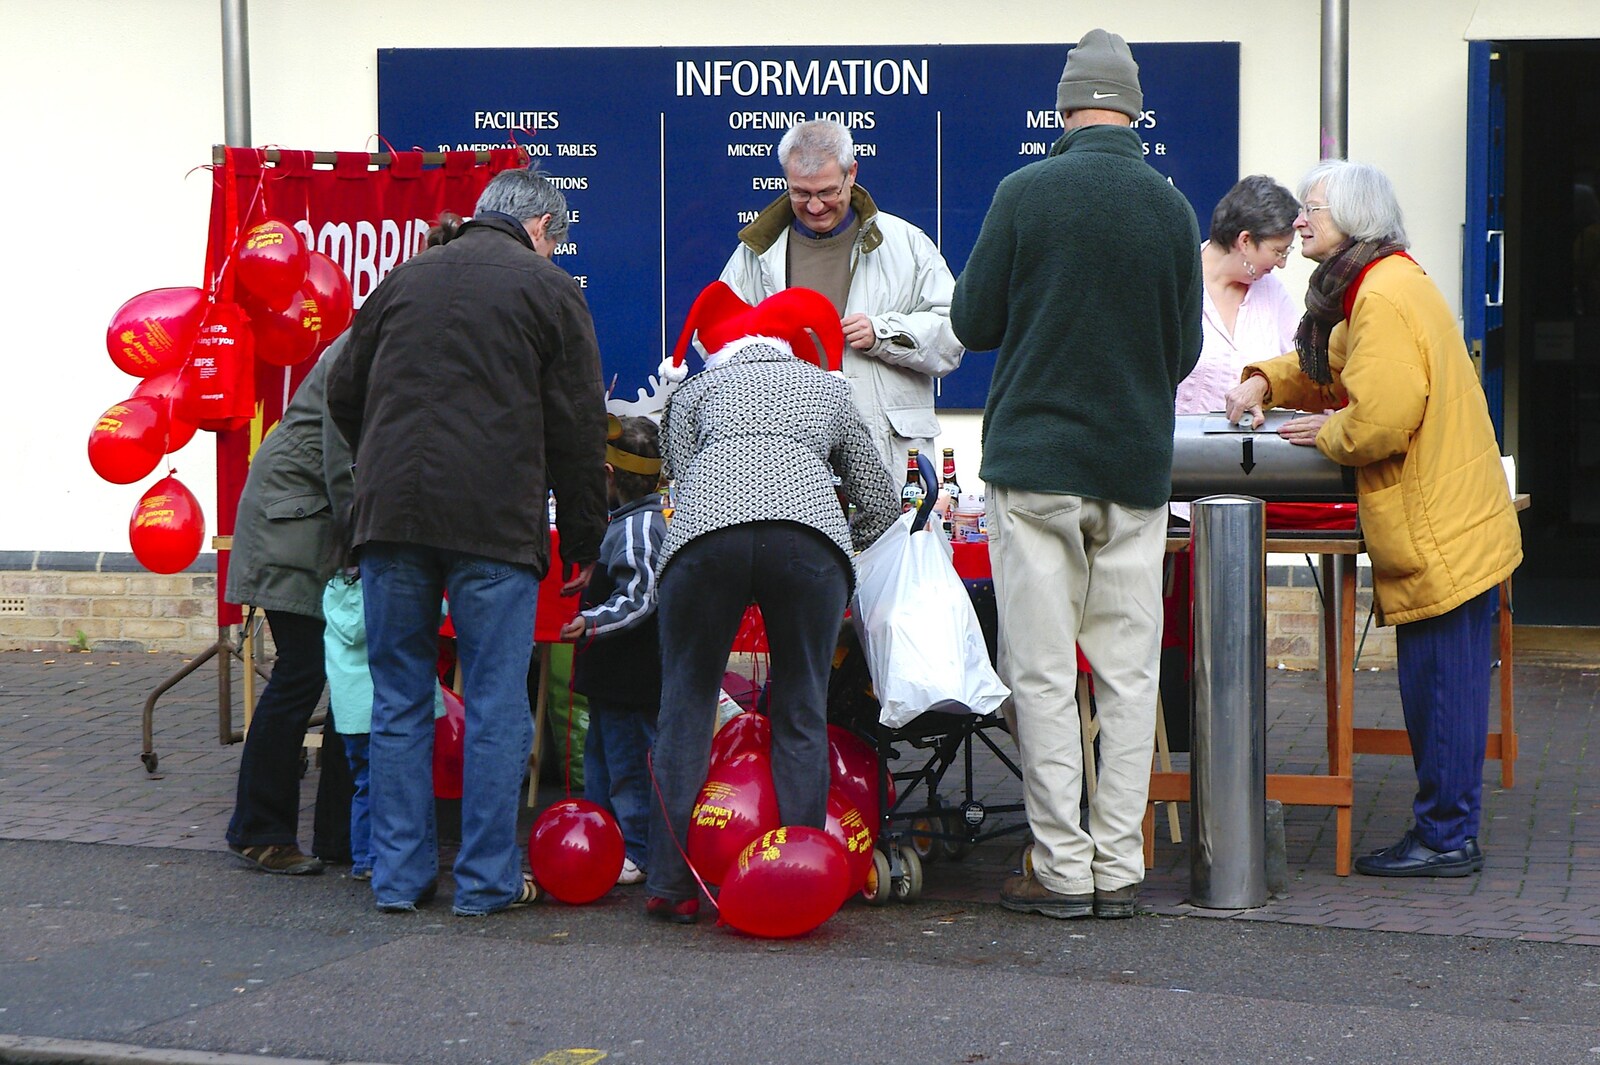 A busy info point outside Mickey Flynn's from The Winter Fair, Mill Road, Cambridge - 2nd December 2006